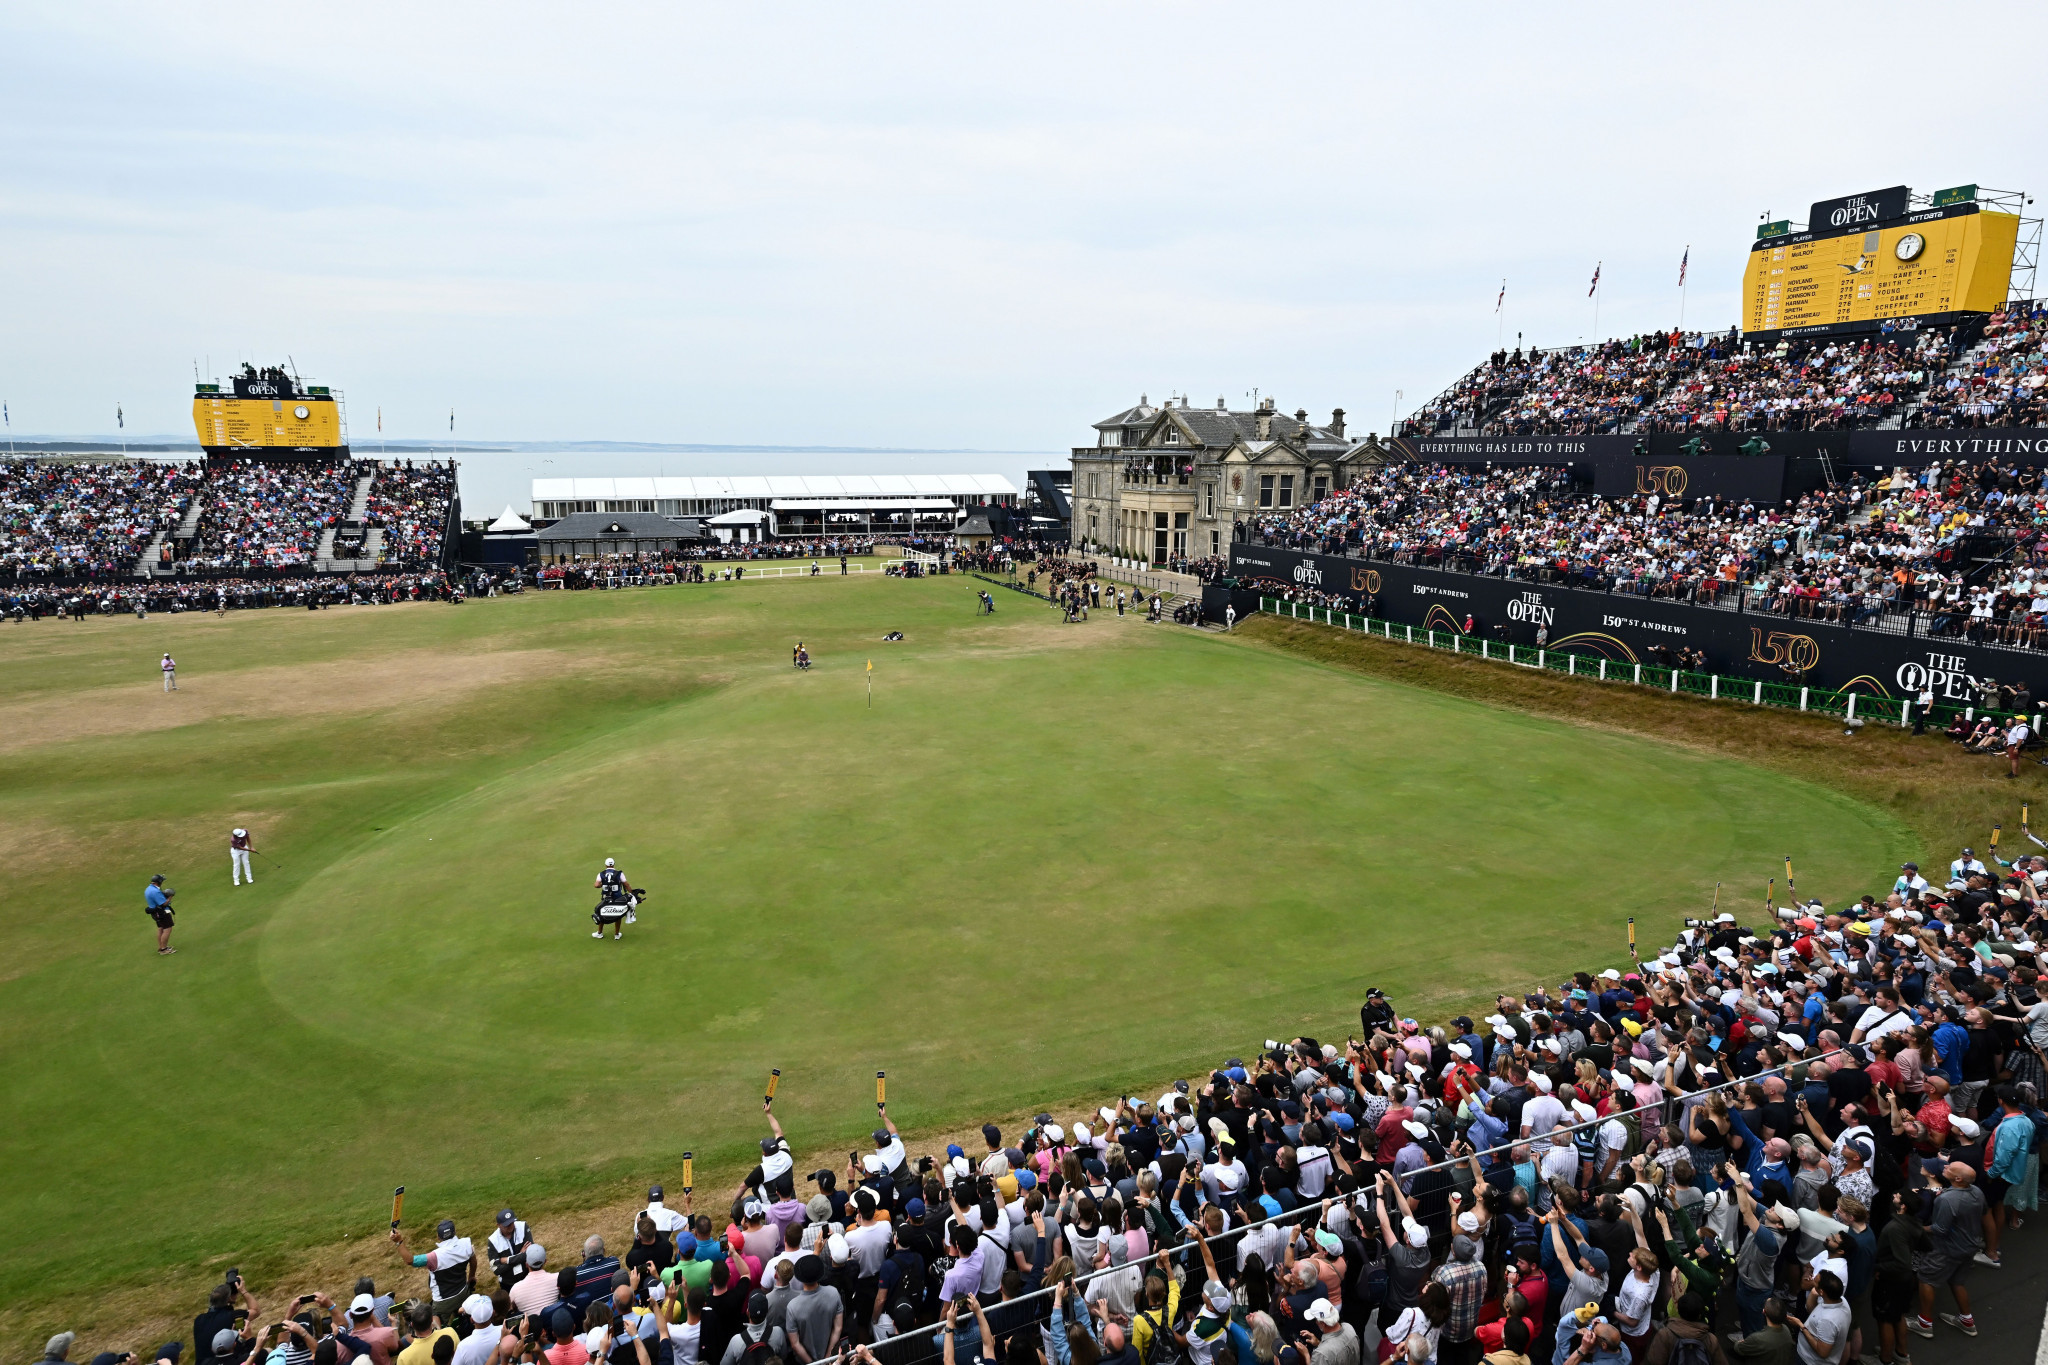 Study claims hosting Open Championship brought £300 million benefit to Scotland